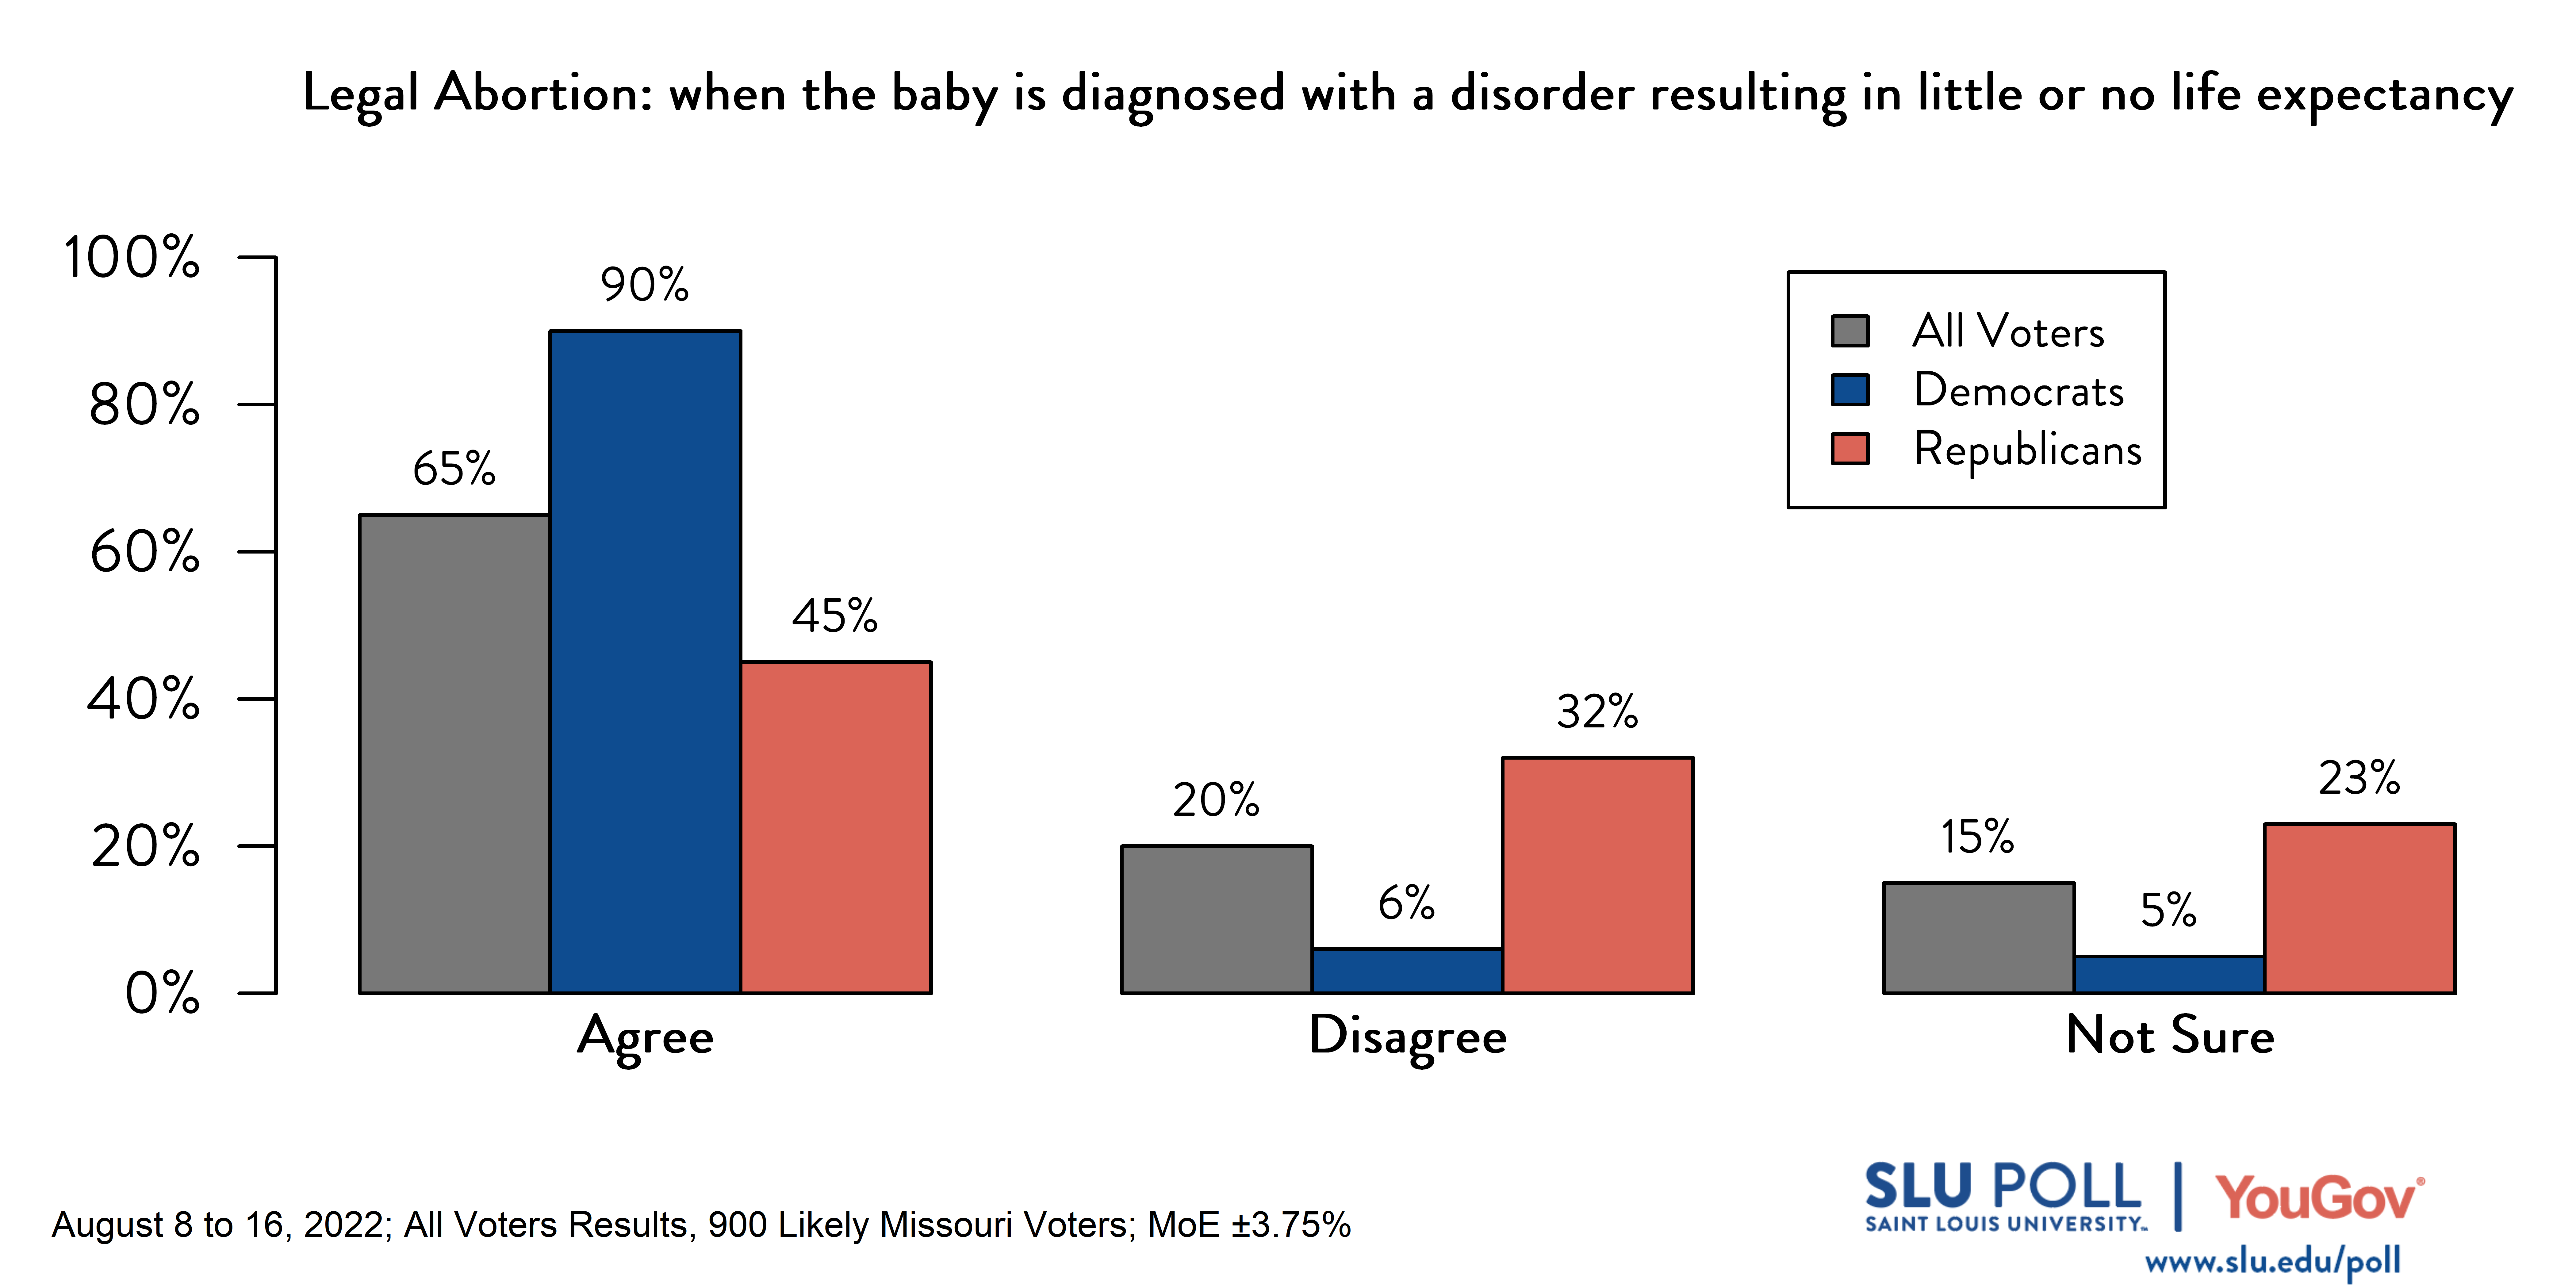 Likely voters' responses to 'Do you think it should be possible for a woman to legally obtain an abortion in the state of Missouri: when the baby is diagnosed with a disorder resulting in little or no life expectancy?': 65% Agree, 20% Disagree, and 15% Not Sure. Democratic voters' responses: ' 90% Agree, 6% Disagree, and 5% Not Sure. Republican voters' responses: 45% Agree, 32% Disagree, and 23% Not Sure. 